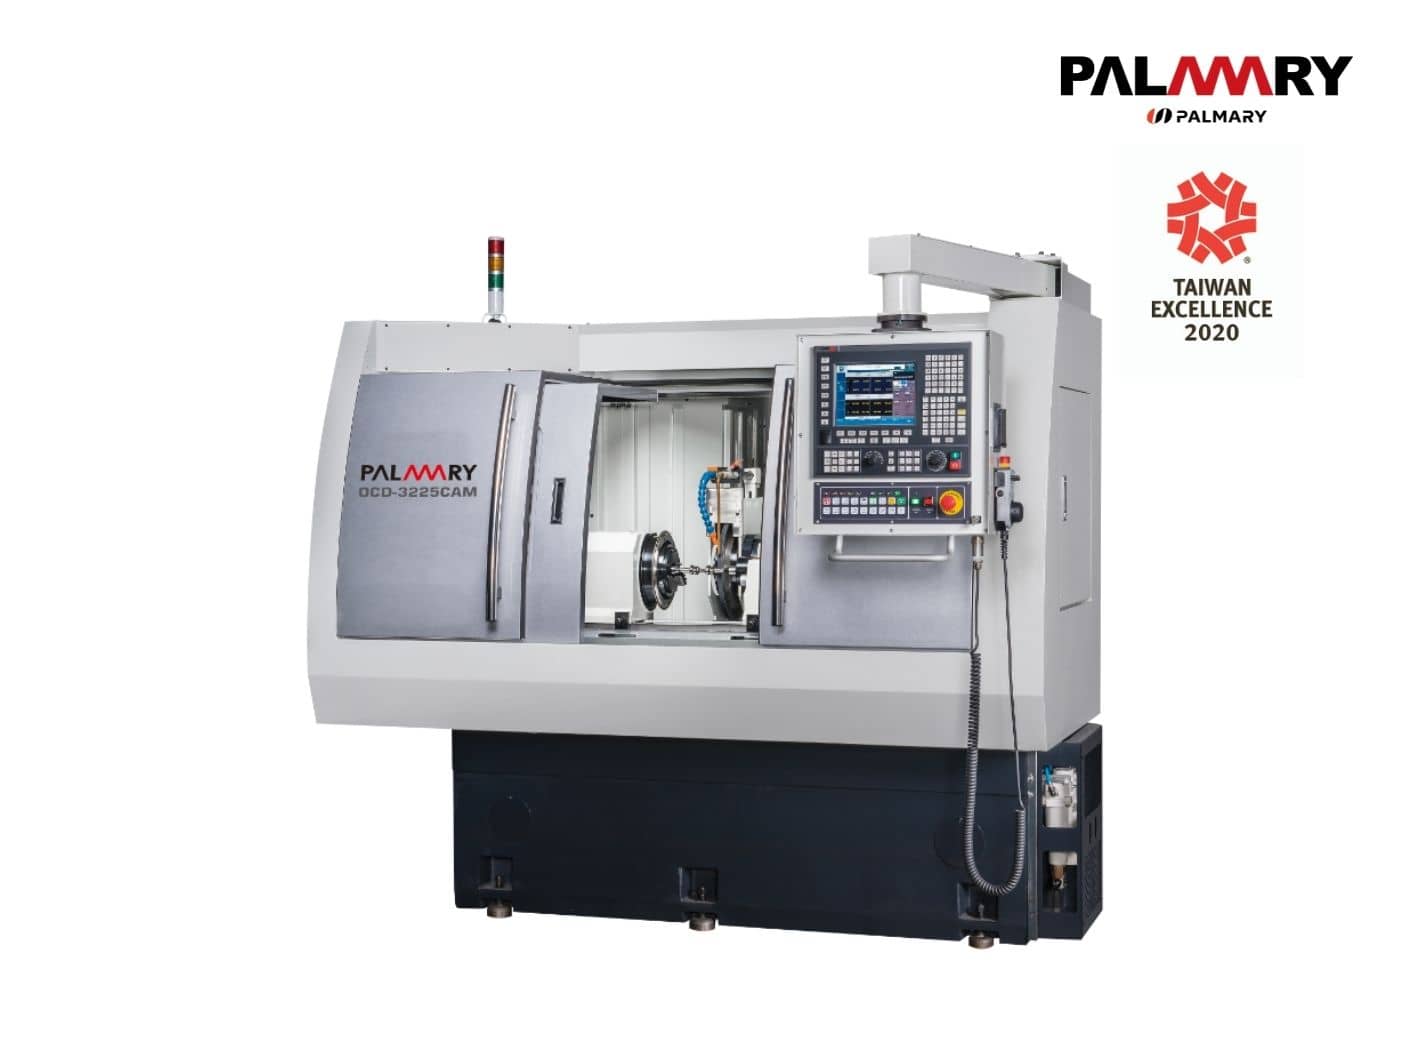 Products|OCD-32100CAM - CNC Cylindrical Grinding Machine [CAM series] - special shaped workpiece